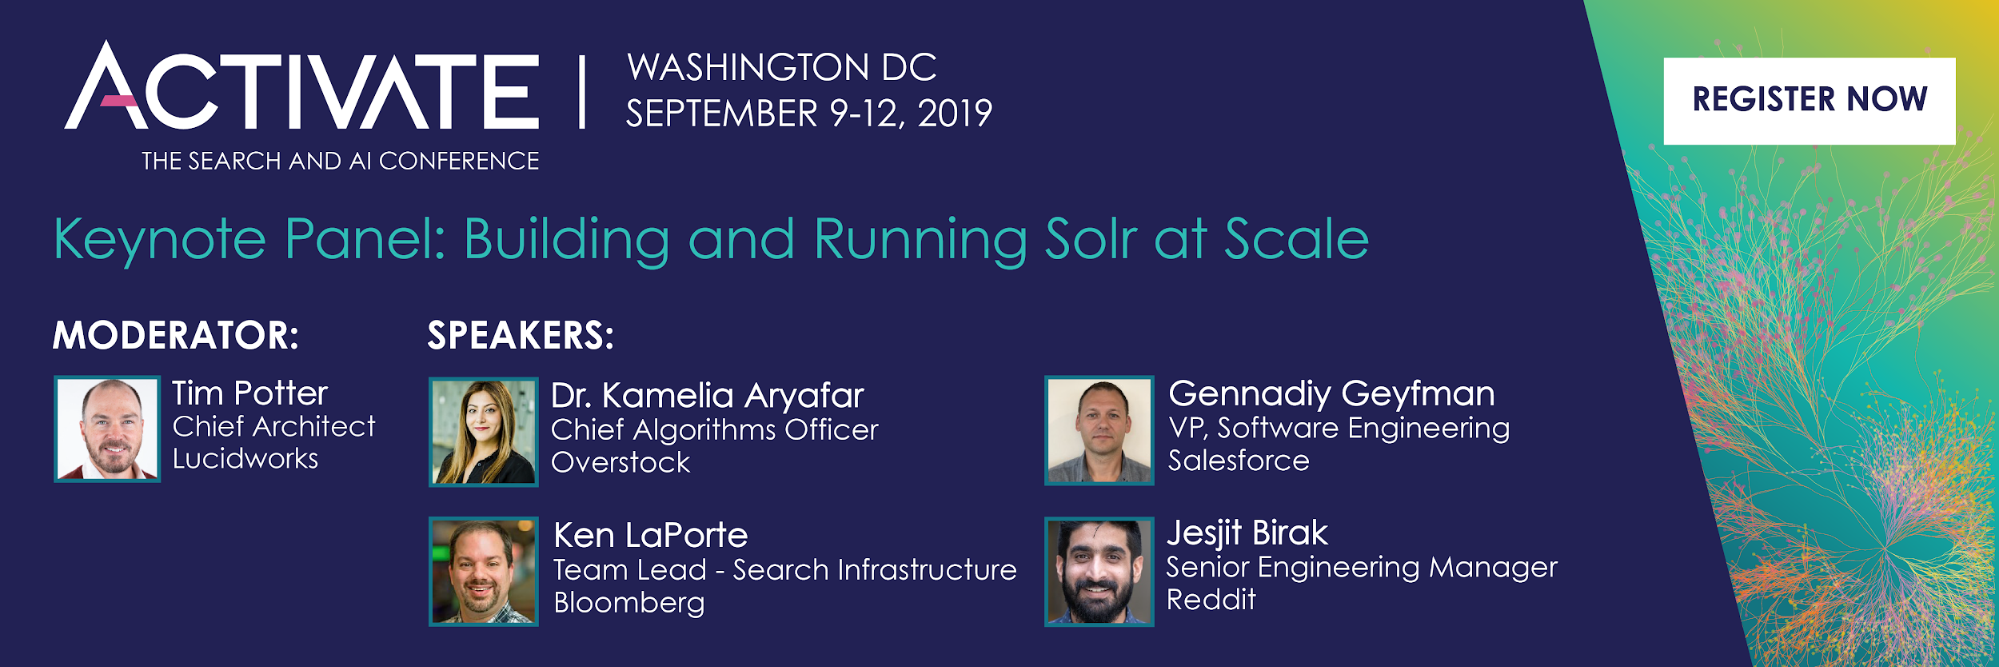 Activate_2019_Keynote_Building_and_Running_Solr_at_Scale.png